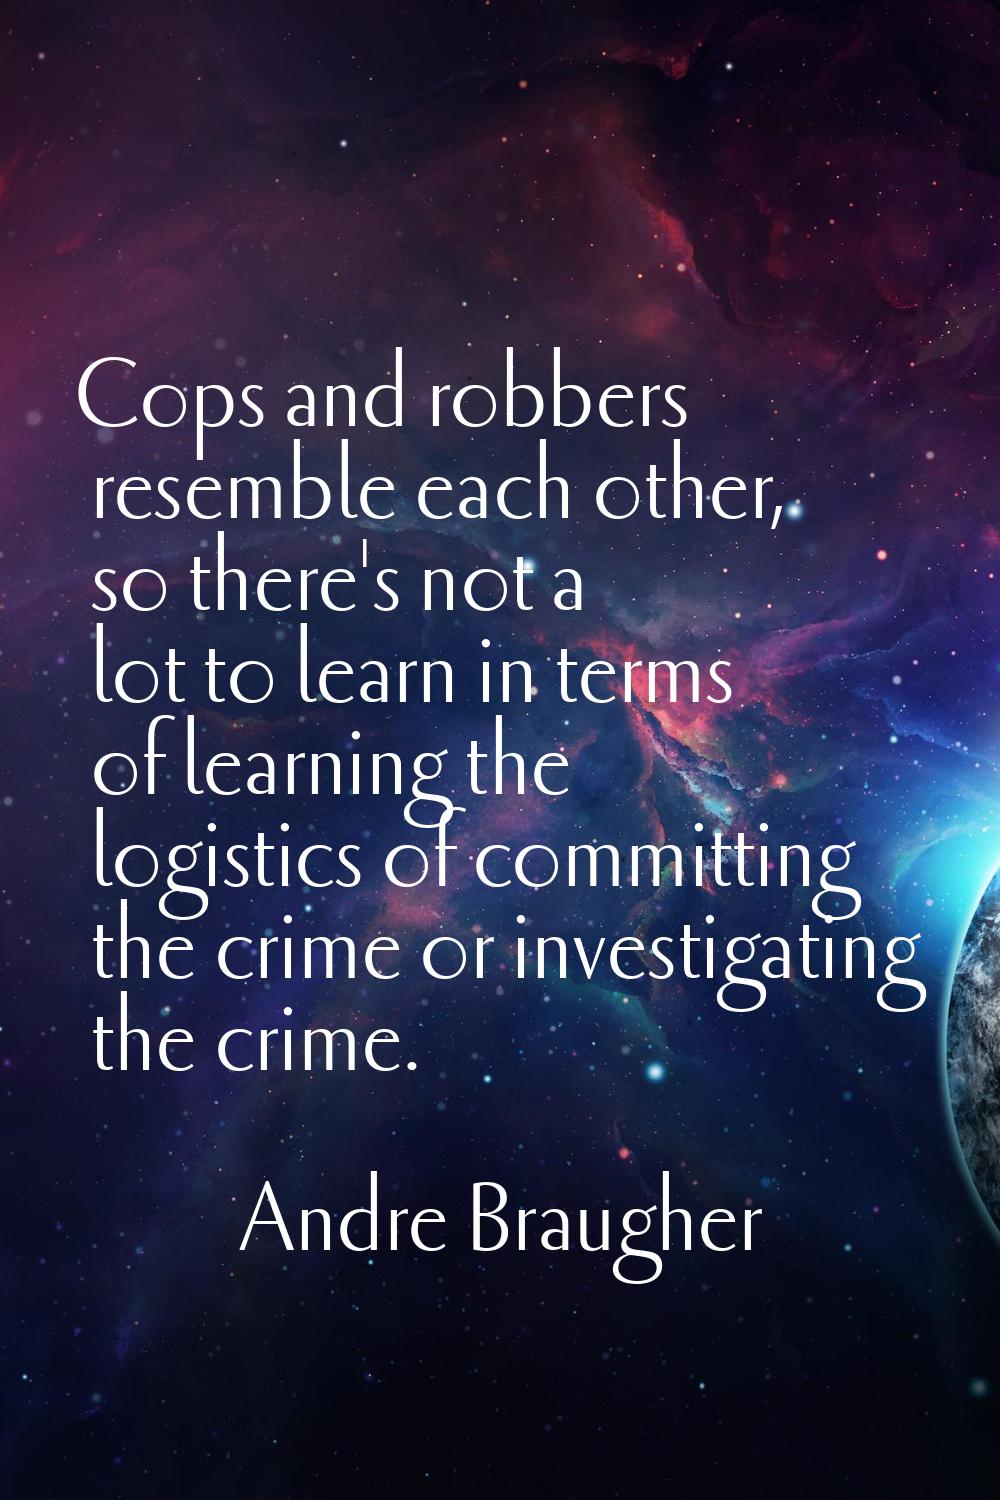 Cops and robbers resemble each other, so there's not a lot to learn in terms of learning the logist